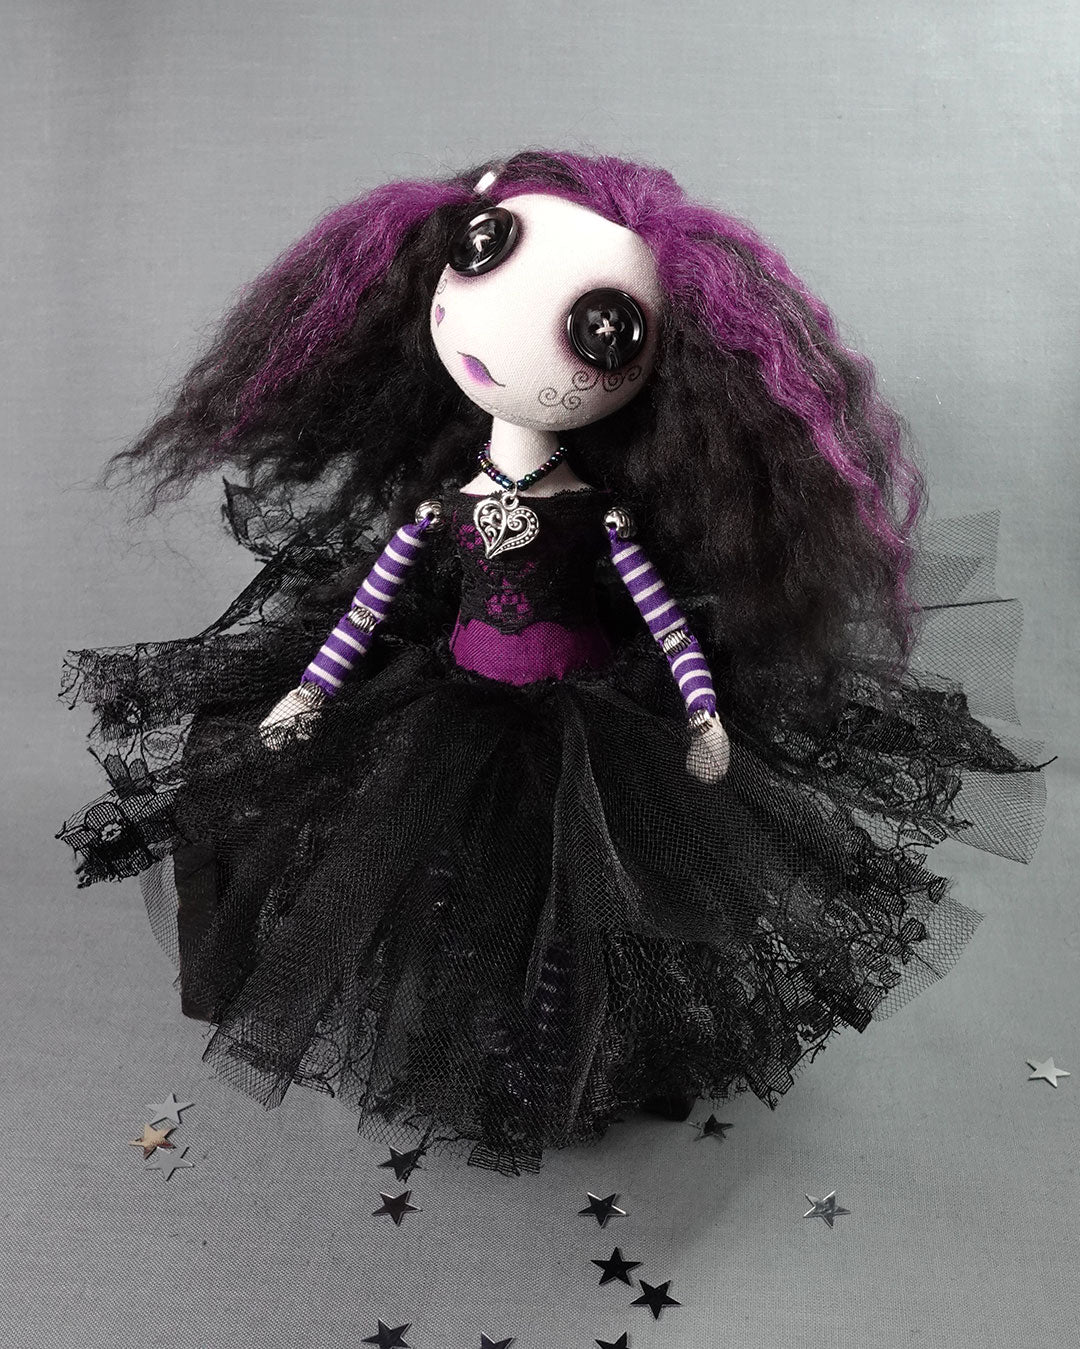 a button eyed gothic doll in purple and black